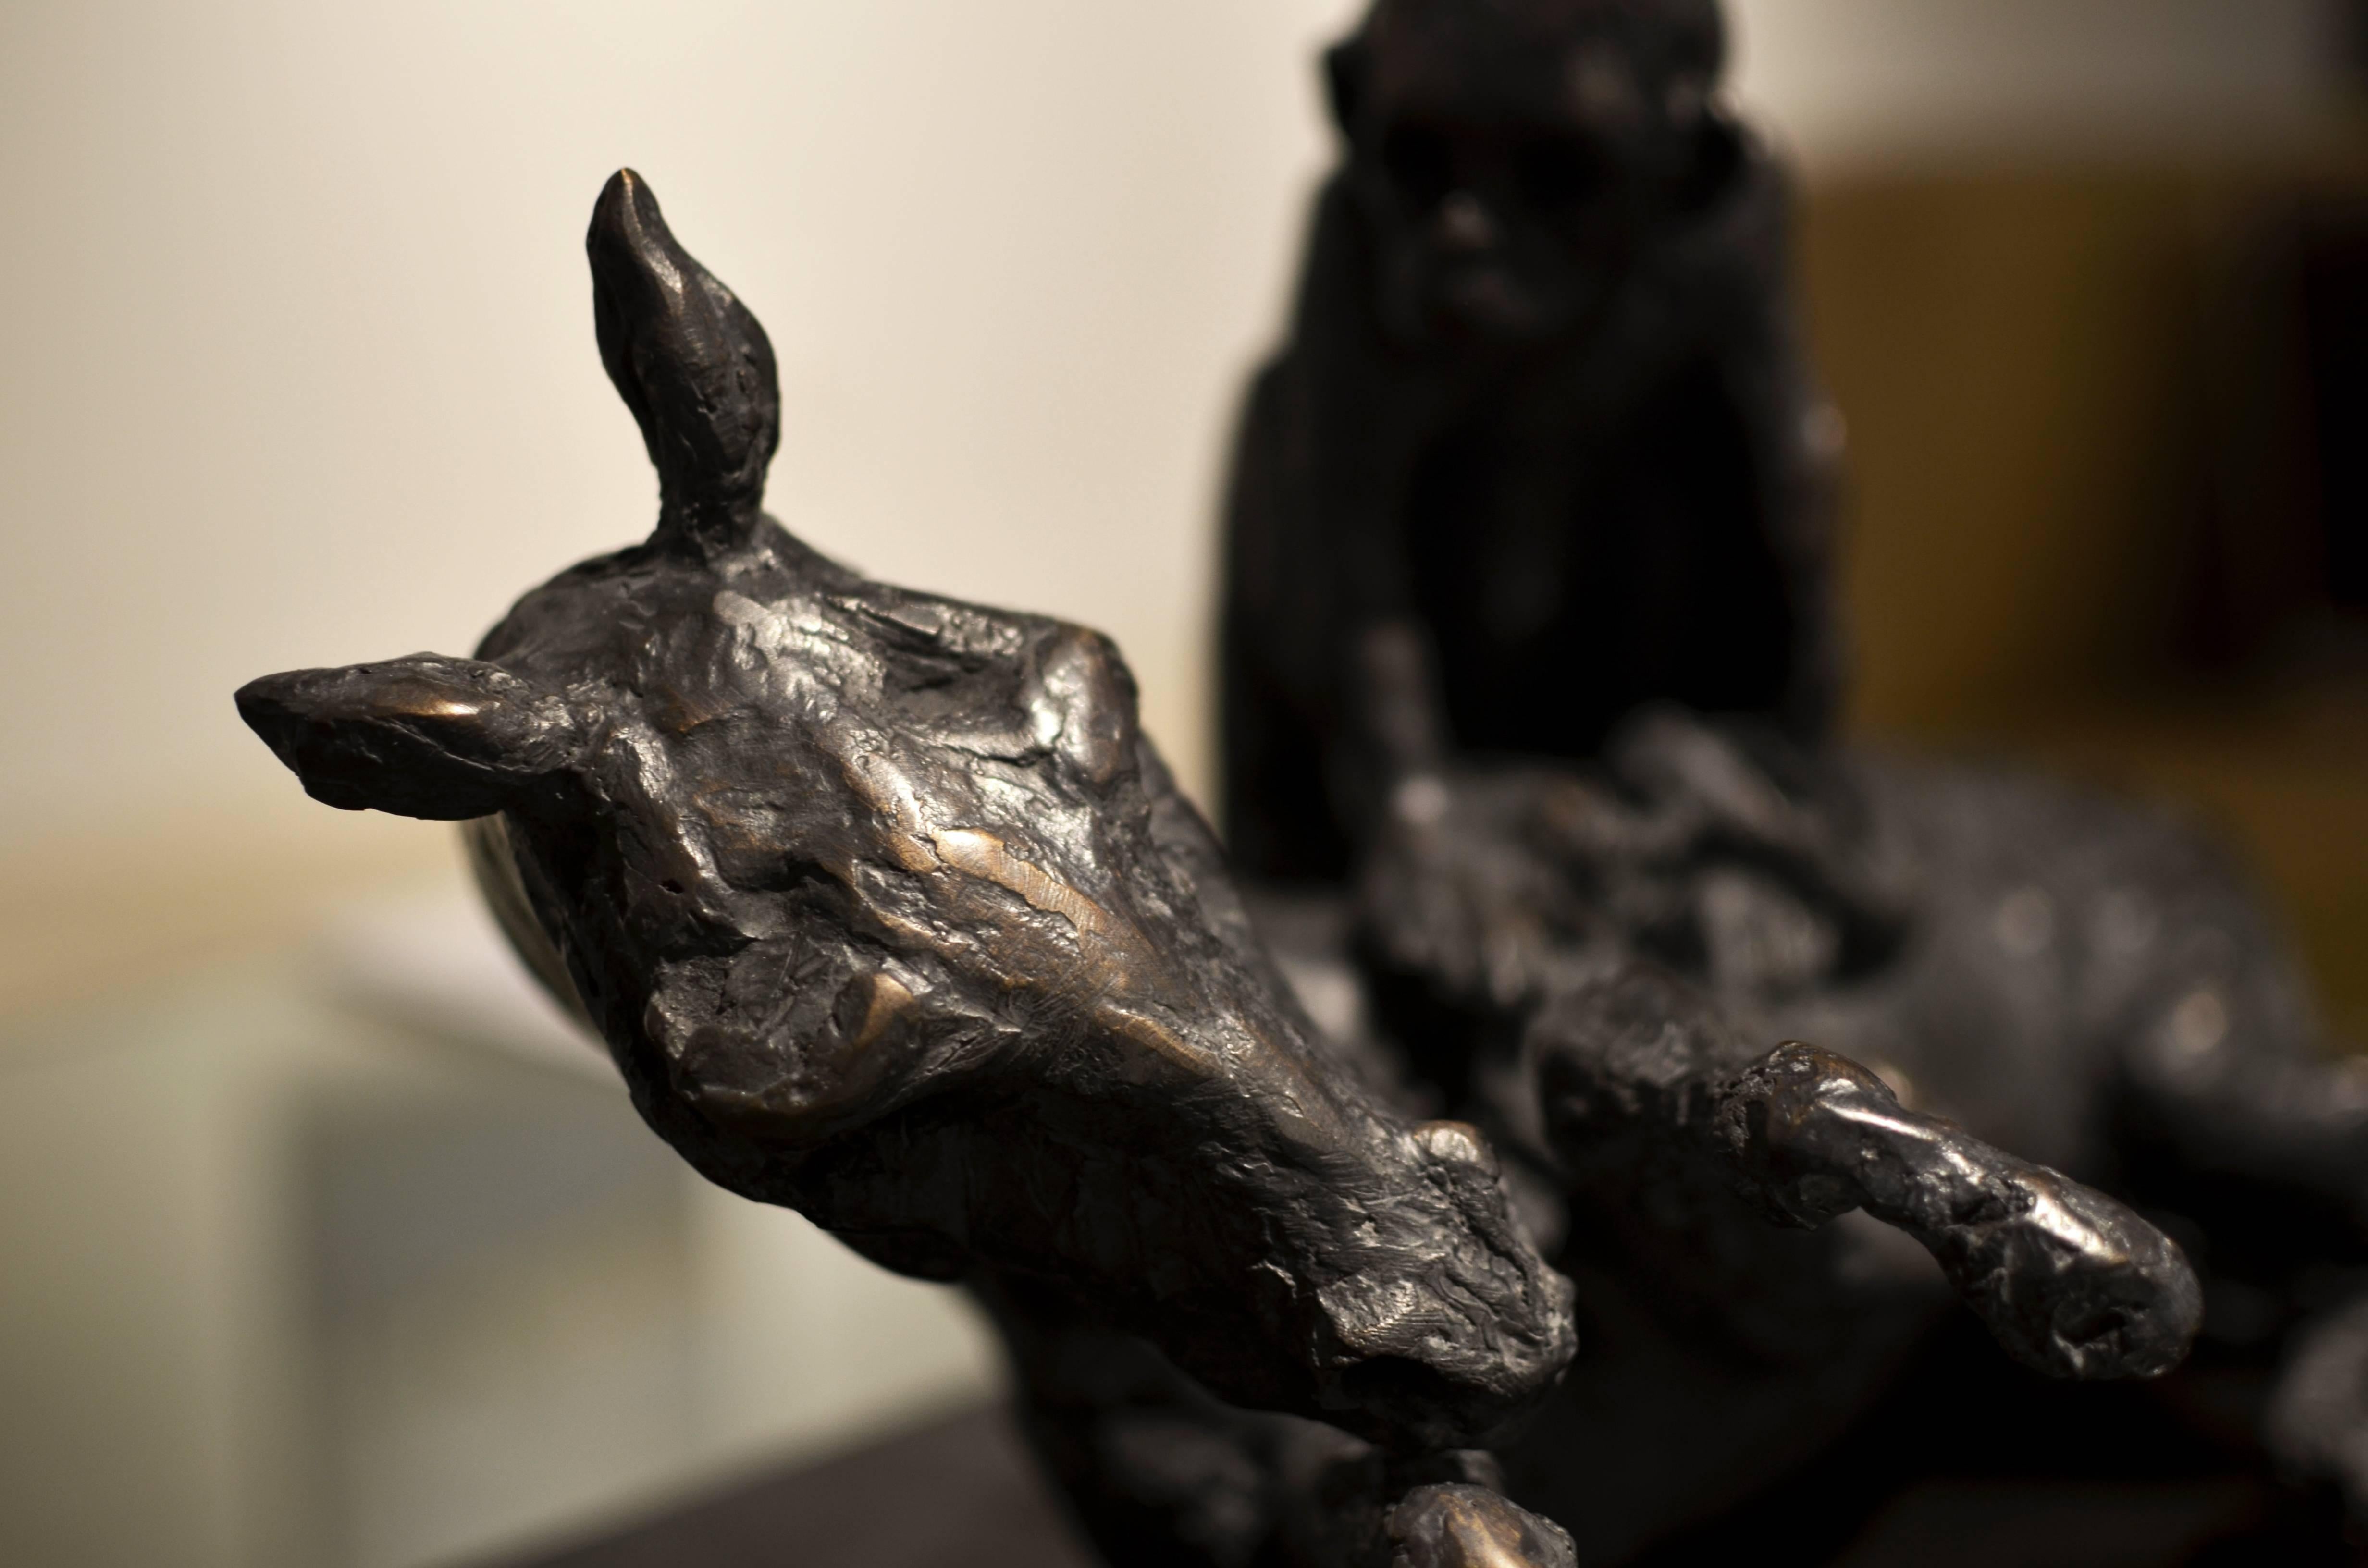 This mythological, figurative bronze sculpture depicts a horse and monkey in a dynamic and intimate composition. The sculpture is detailed, depicting rough skin.

Anyone who shares Beth Carter’s fascination with the human condition must surely